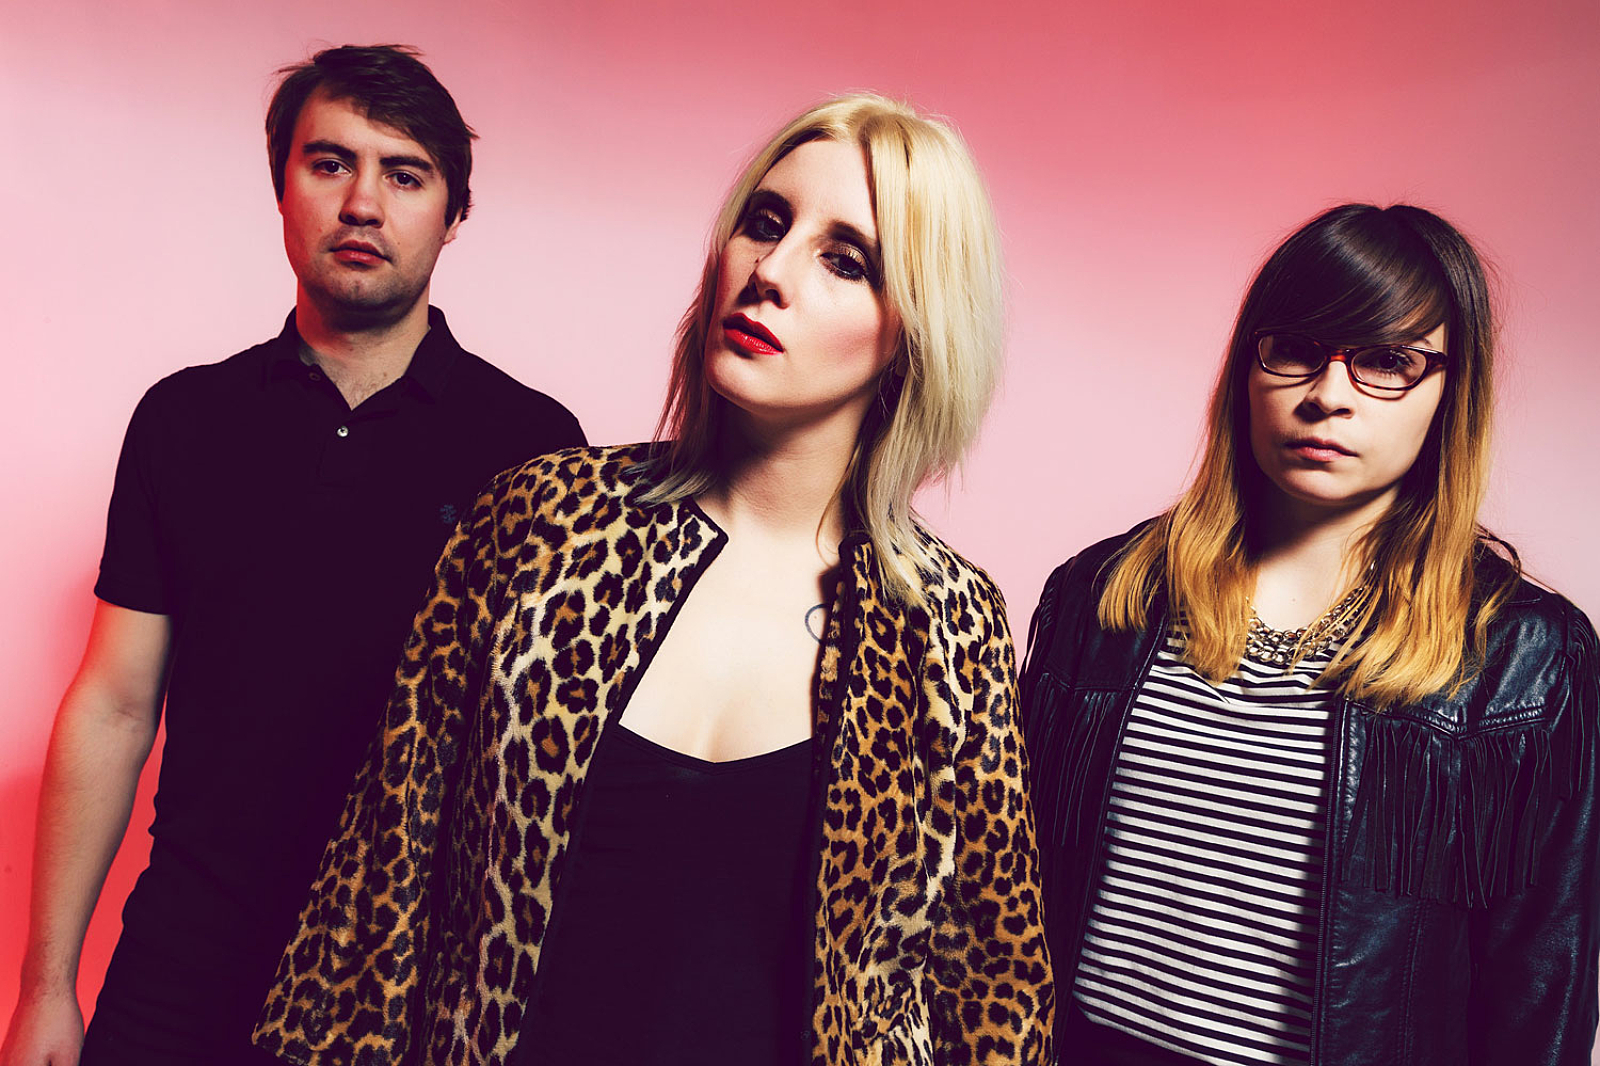 White Lung get chatty in their new 'Sister' video